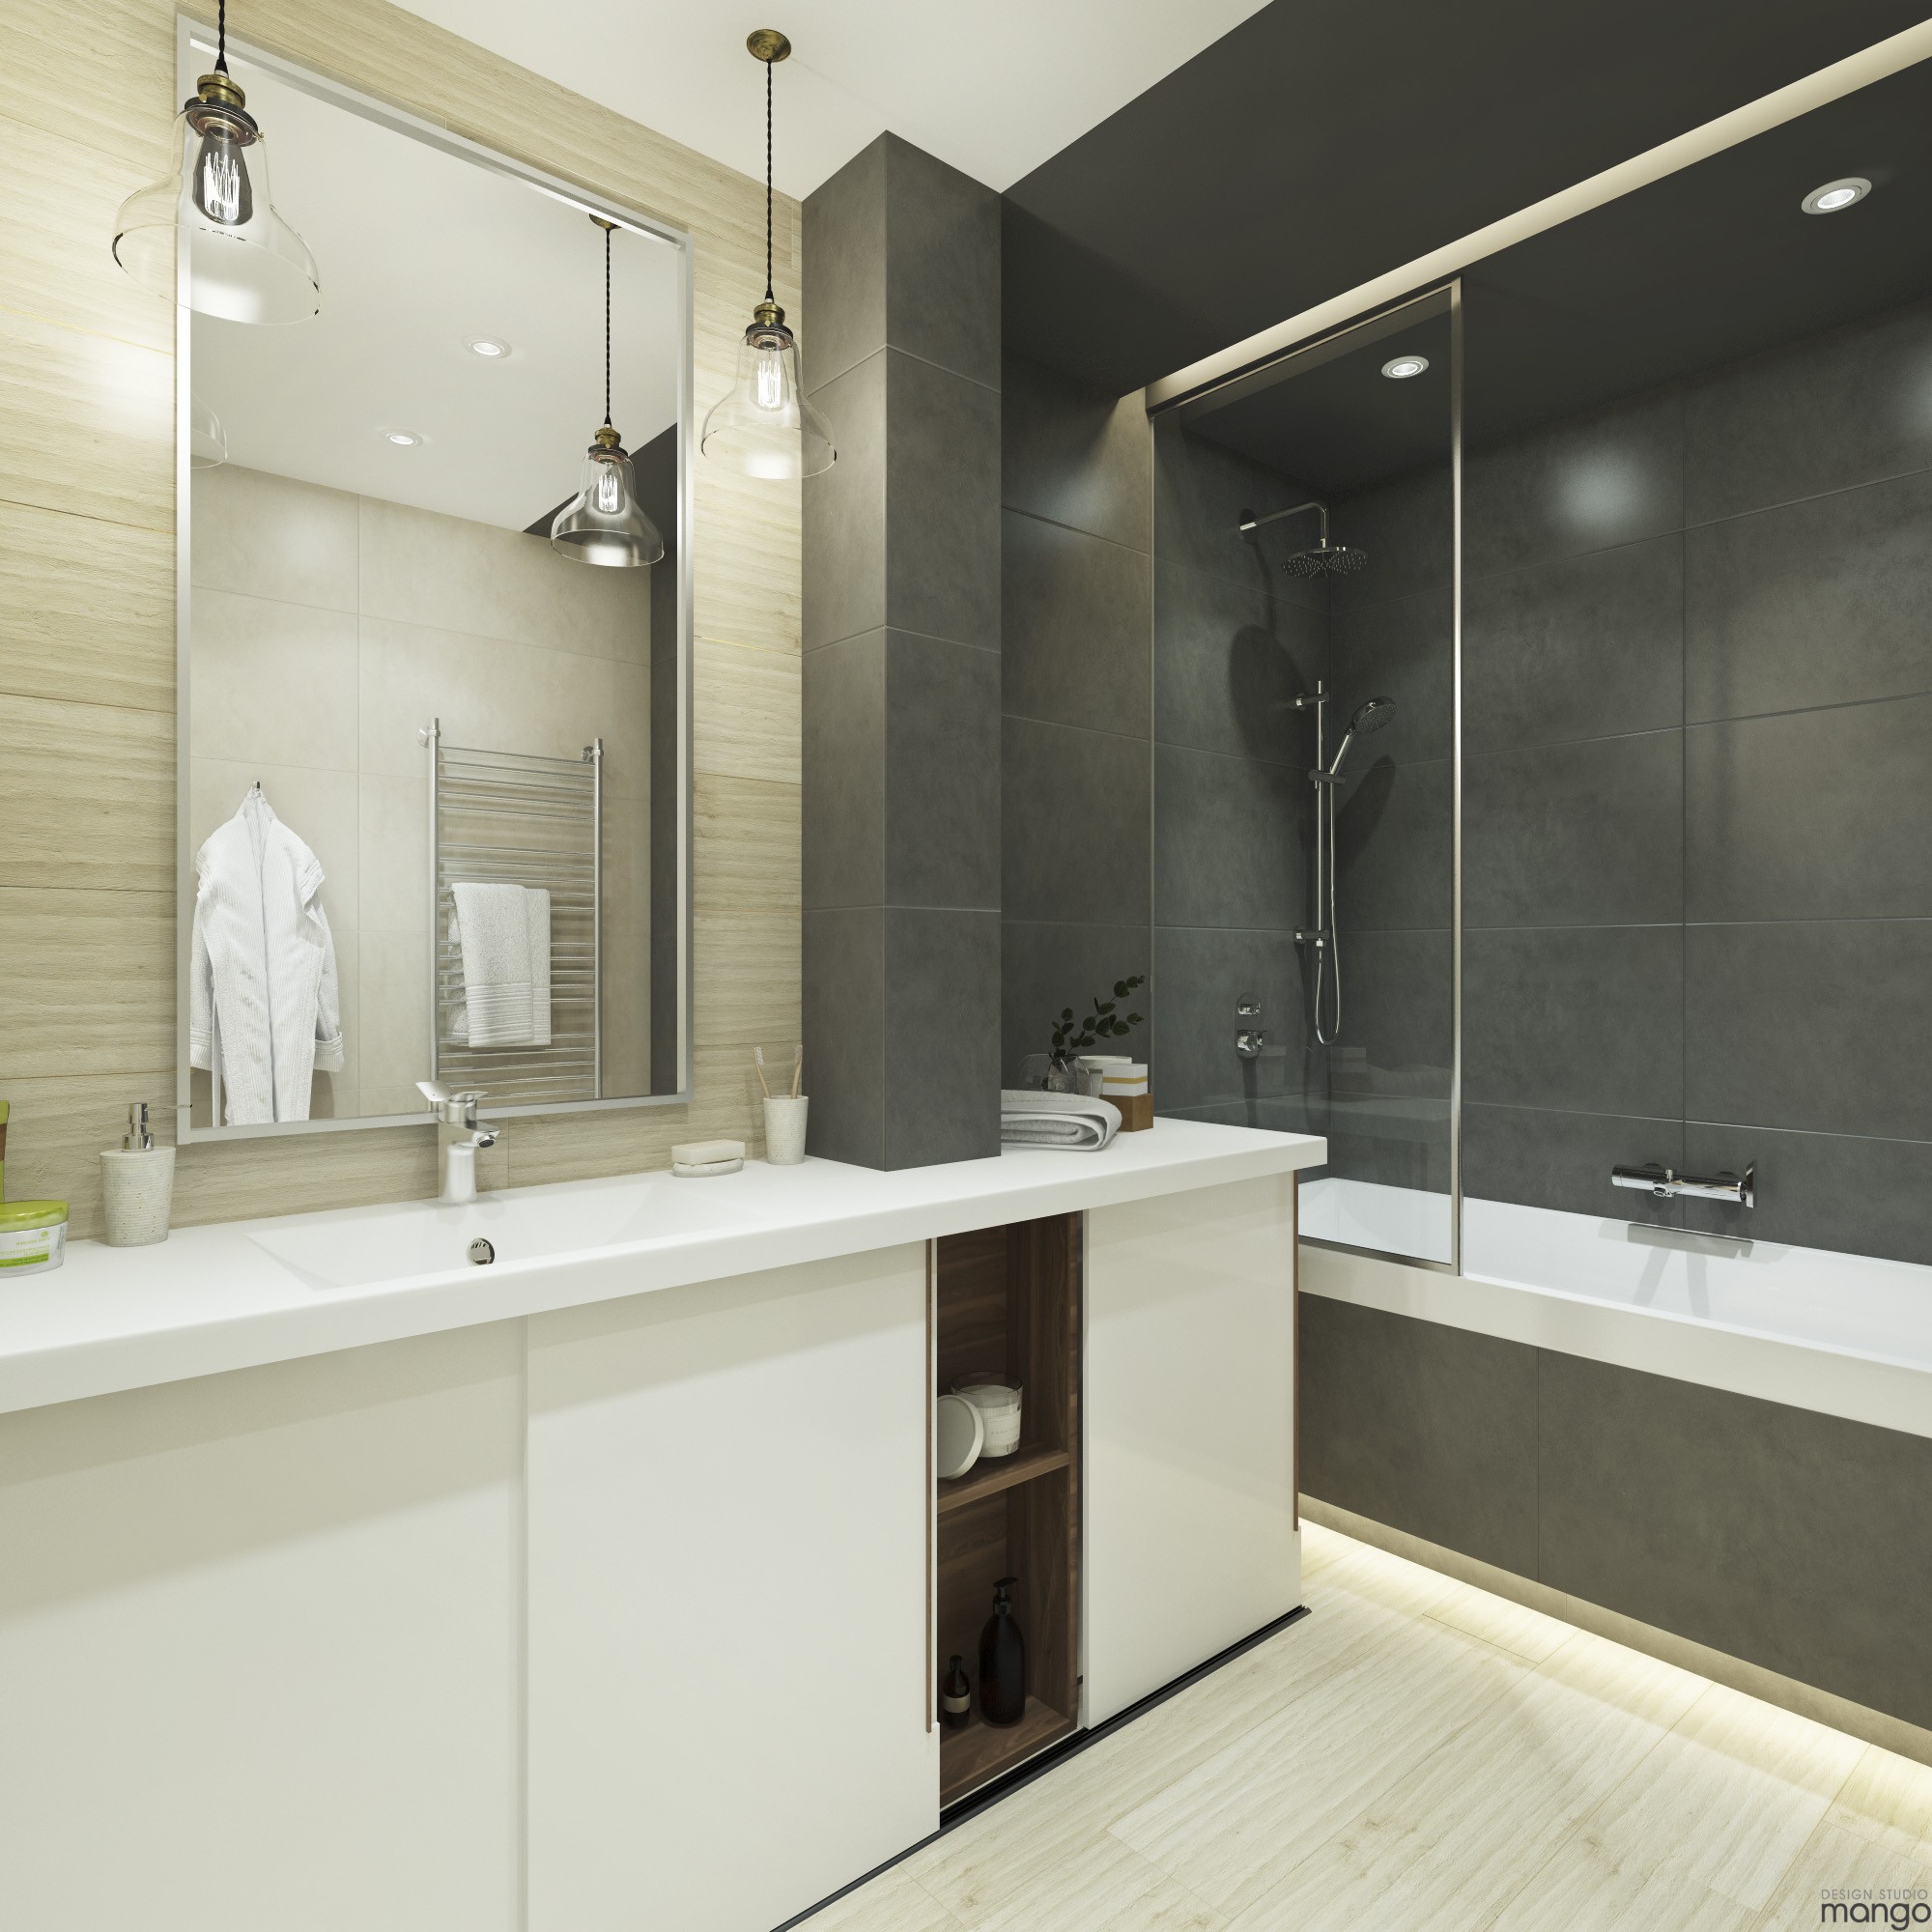 modern small bathroom "width =" 2000 "height =" 2000 "srcset =" https://mileray.com/wp-content/uploads/2020/05/1588515716_634_Modern-Small-Bathroom-Designs-Combined-With-Variety-of-Tile-Backsplash.jpg 2000w, https: // mileray.com/wp-content/uploads/2016/10/Design-Studio-Mango1-4-150x150.jpg 150w, https://mileray.com/wp-content/uploads/2016/10/Design-Studio-Mango1 -4-300x300.jpg 300w, https://mileray.com/wp-content/uploads/2016/10/Design-Studio-Mango1-4-768x768.jpg 768w, https://mileray.com/wp-content /uploads/2016/10/Design-Studio-Mango1-4-1024x1024.jpg 1024w, https://mileray.com/wp-content/uploads/2016/10/Design-Studio-Mango1-4-696x696.jpg 696w , https://mileray.com/wp-content/uploads/2016/10/Design-Studio-Mango1-4-1068x1068.jpg 1068w, https://mileray.com/wp-content/uploads/2016/10/ Design-Studio-Mango1-4-420x420.jpg 420w "sizes =" (maximum width: 2000px) 100vw, 2000px